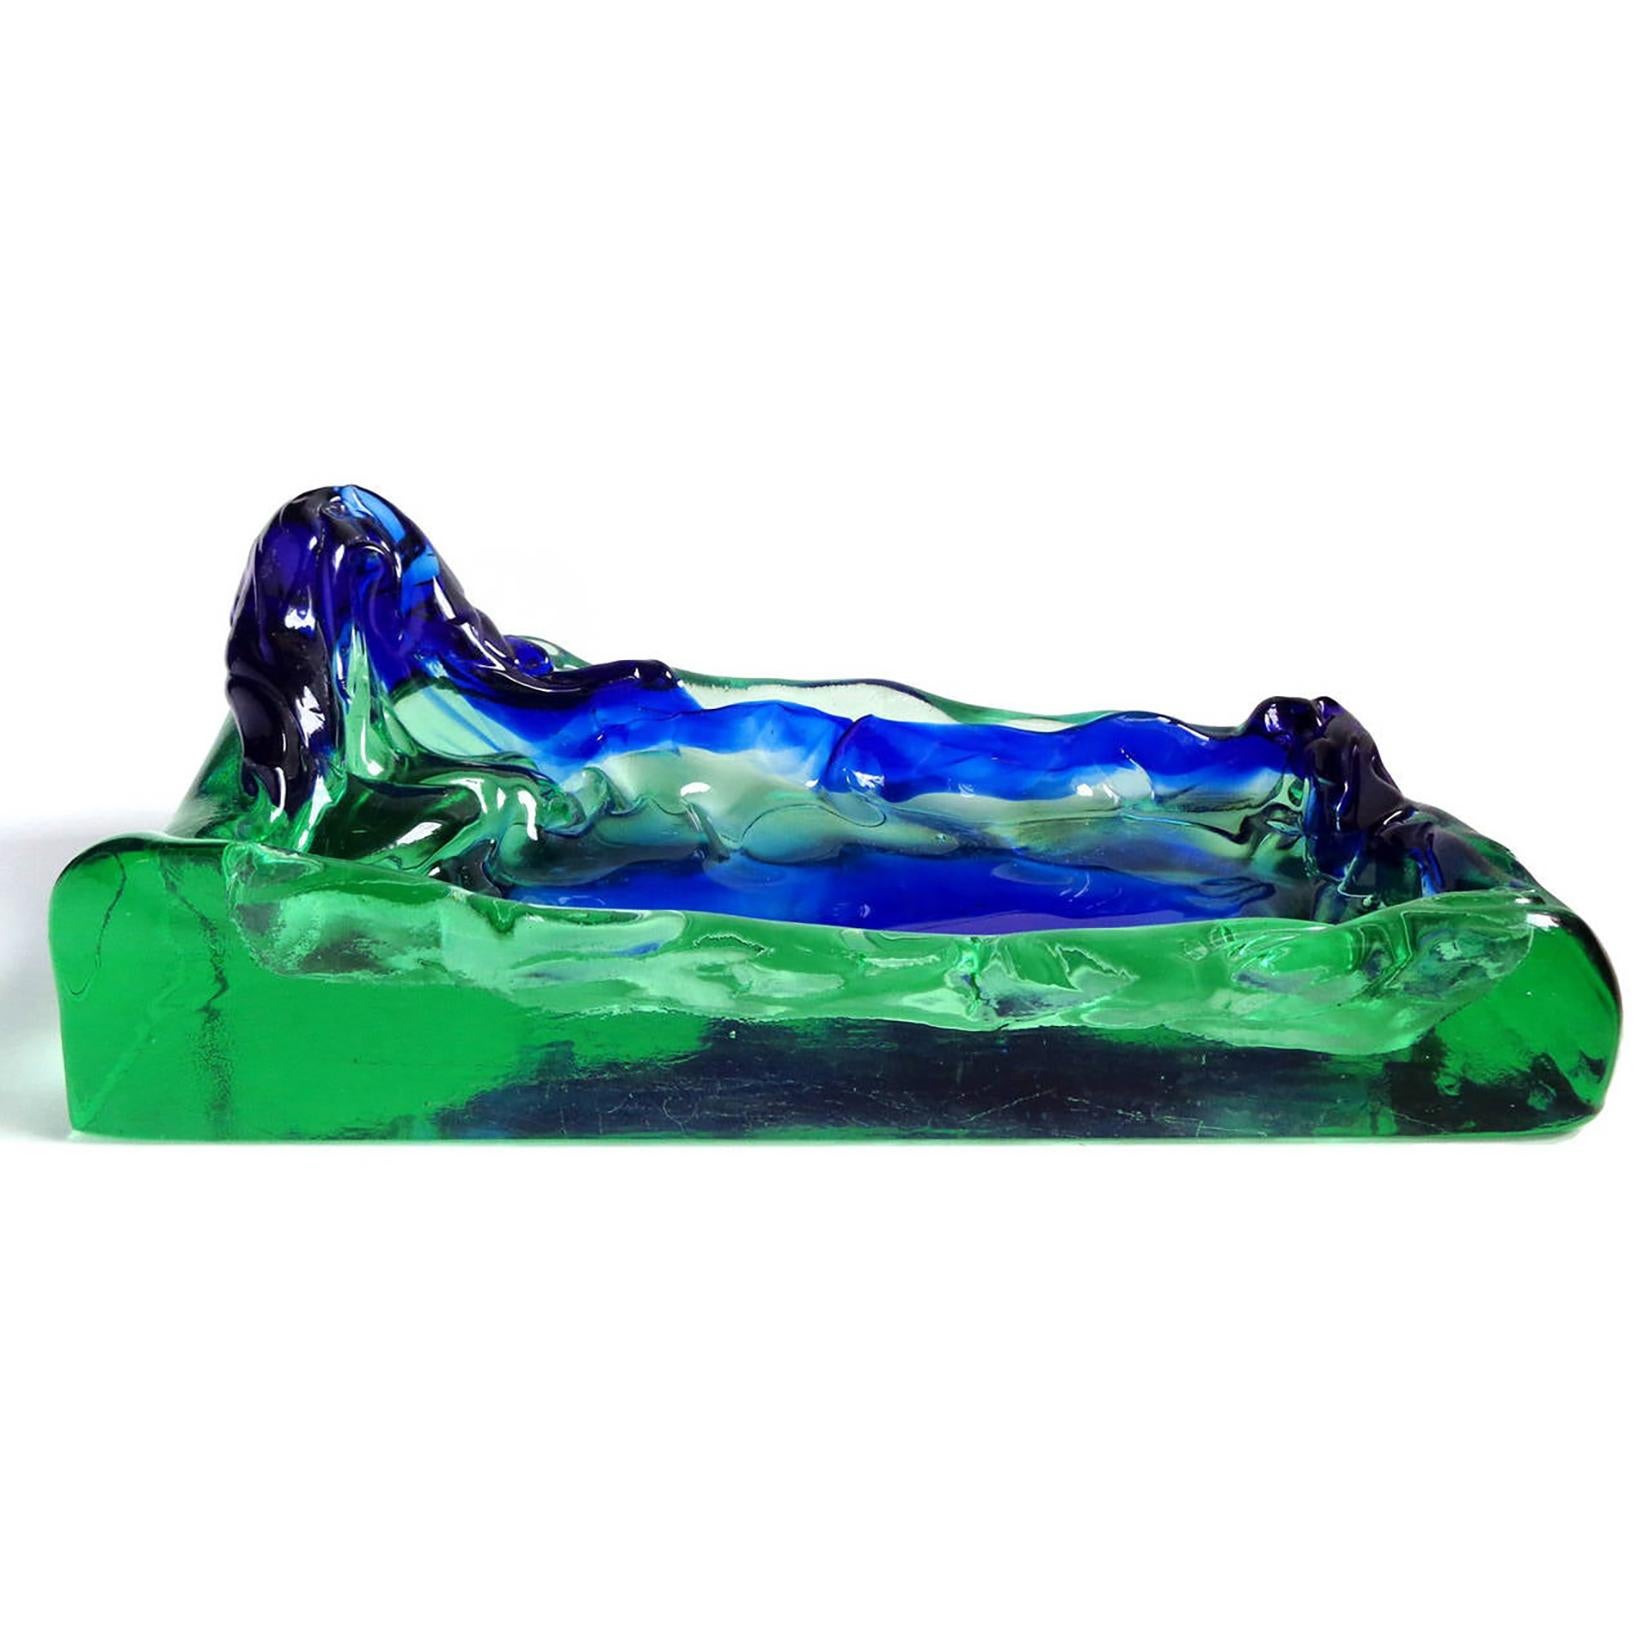 Reserved for Claire - 2 Salviati Items

Item Ref: LU974118571062
Beautiful, vintage Murano hand blown cobalt blue and green Sommerso coastal mountain range and lagoon beach Italian art glass bowl / tray. Documented to the Salviati Company. Great